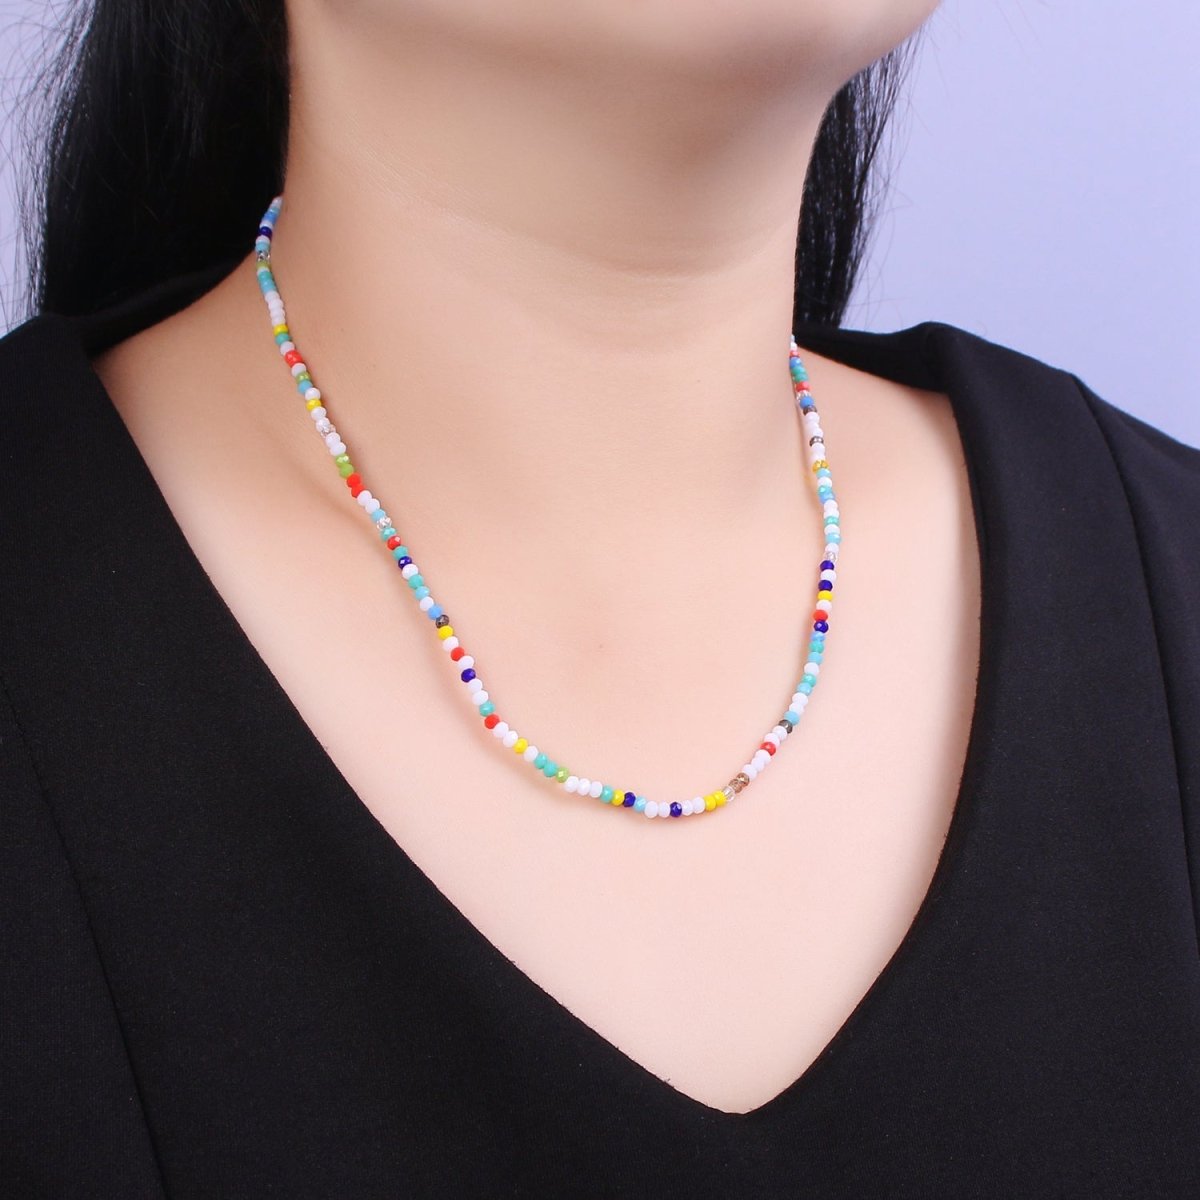 Rainbow Color Glass Seed Bead Necklace 17.5 inch + 2 inch Extender Chain Necklace Gift | WA-449 Clearance Pricing - DLUXCA